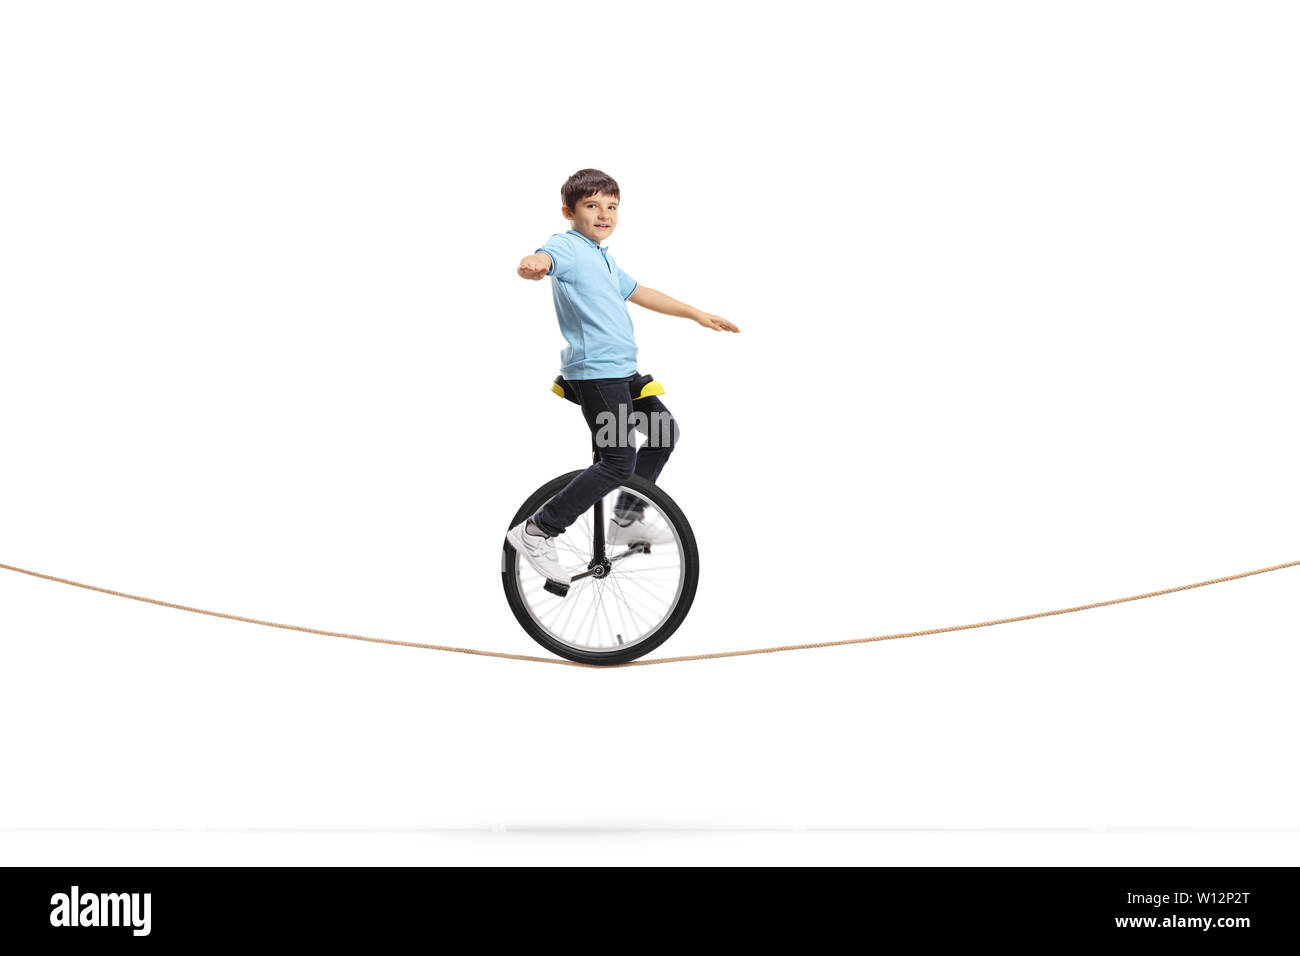 Full length shot of a boy riding a unicycle on a rope isolated on white background Stock Photo